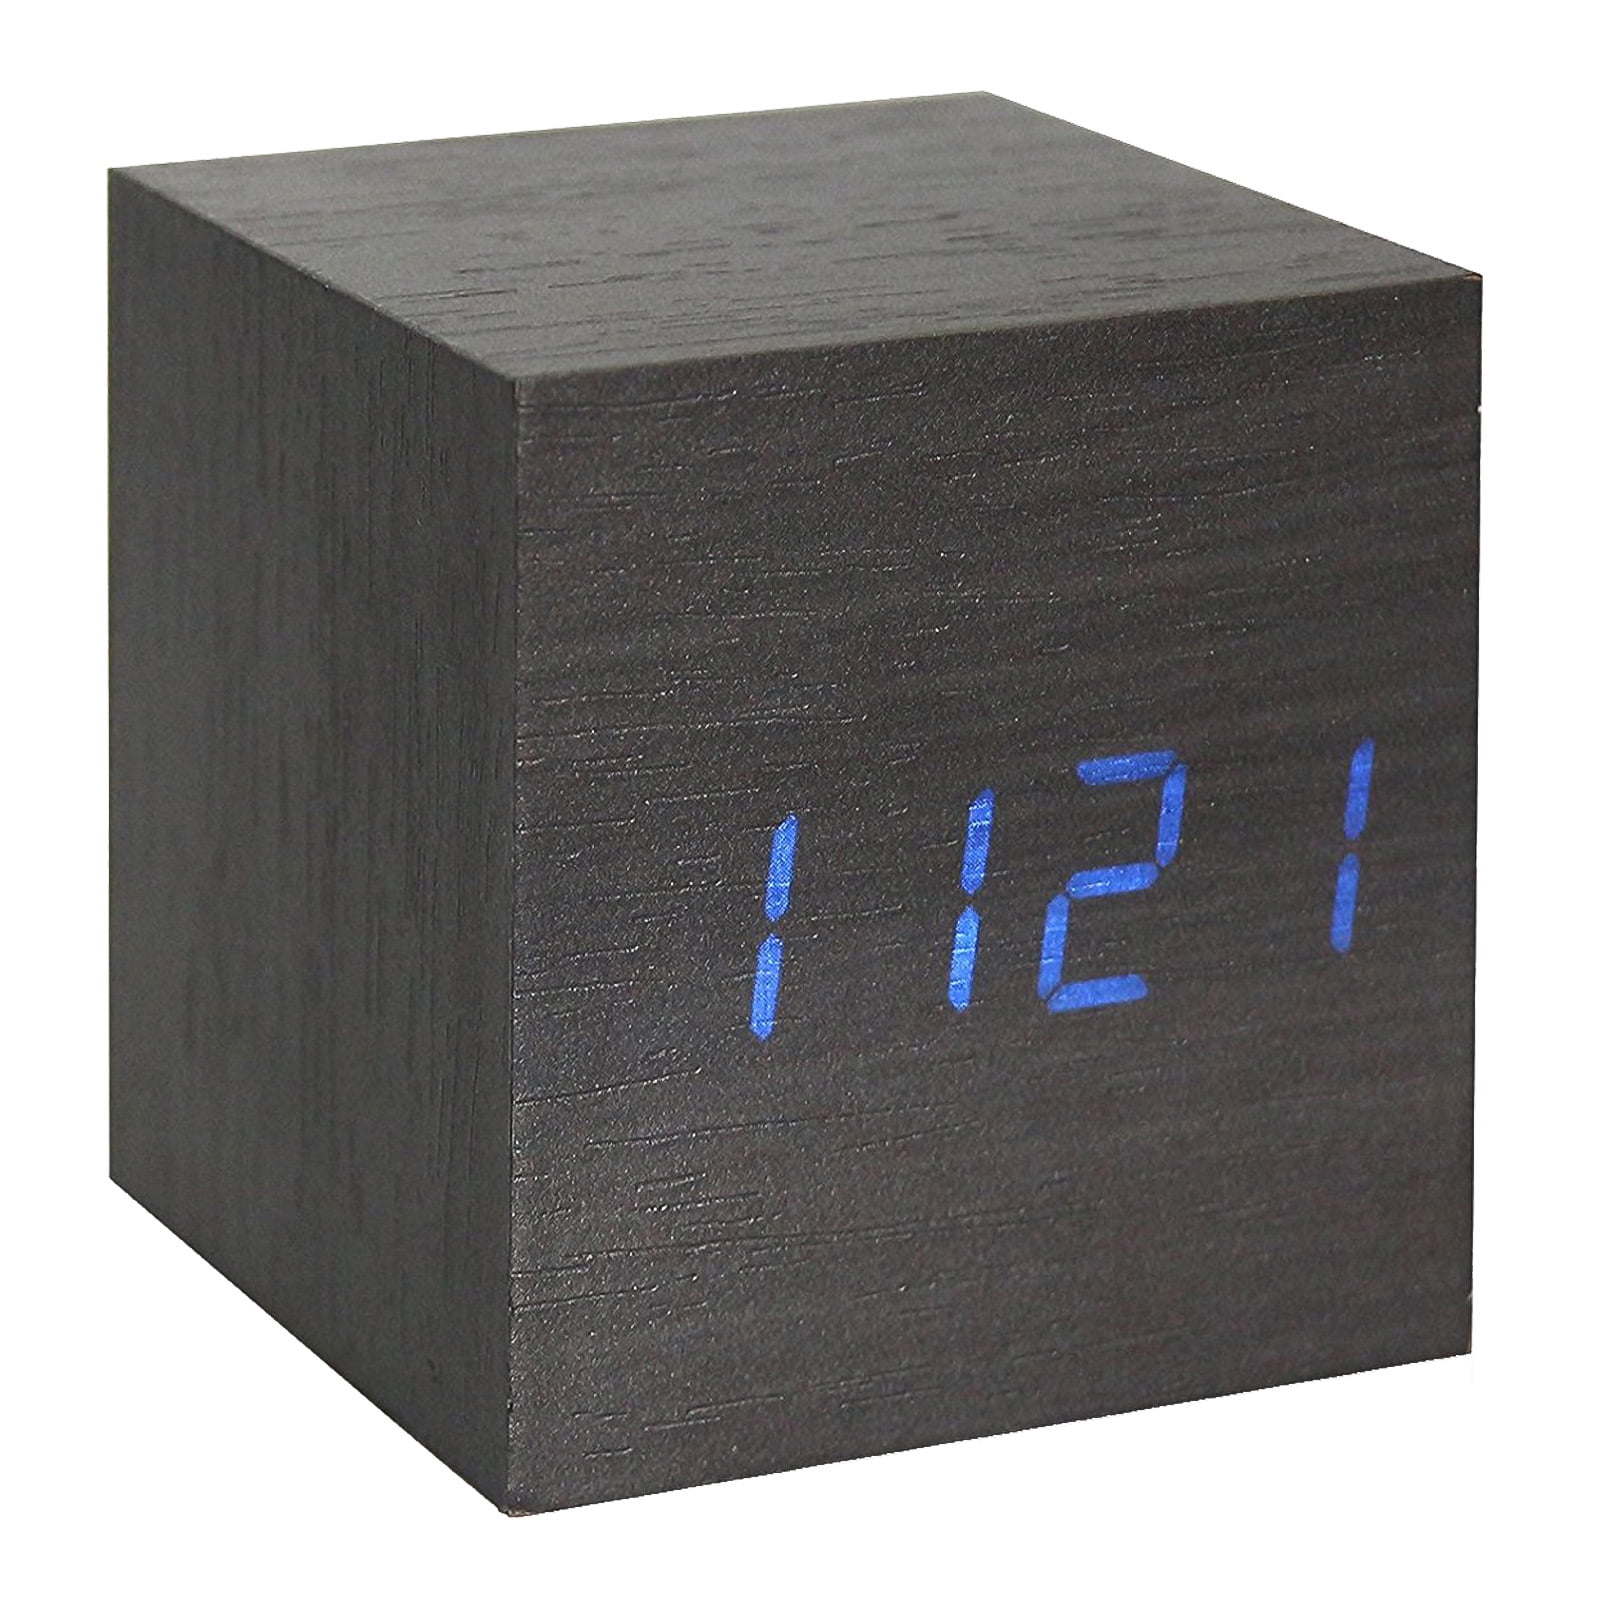 Modern Cube Wooden Wood Digital LED Desk Voice Control Alarm Clock ThermometerYV 